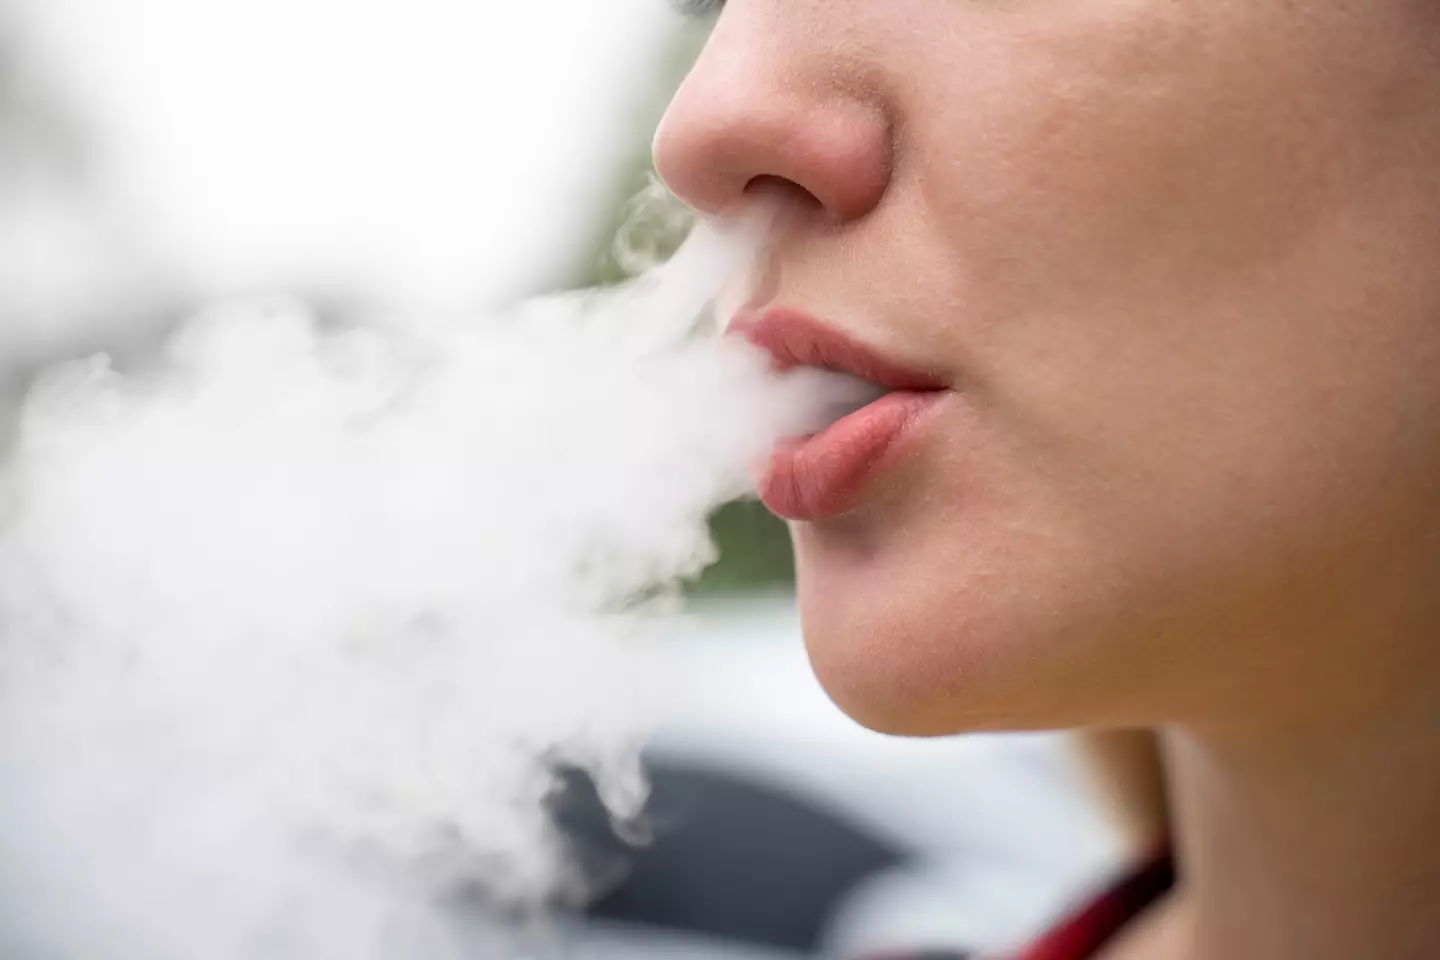 An expert has revealed the ways vaping can damage your skin.